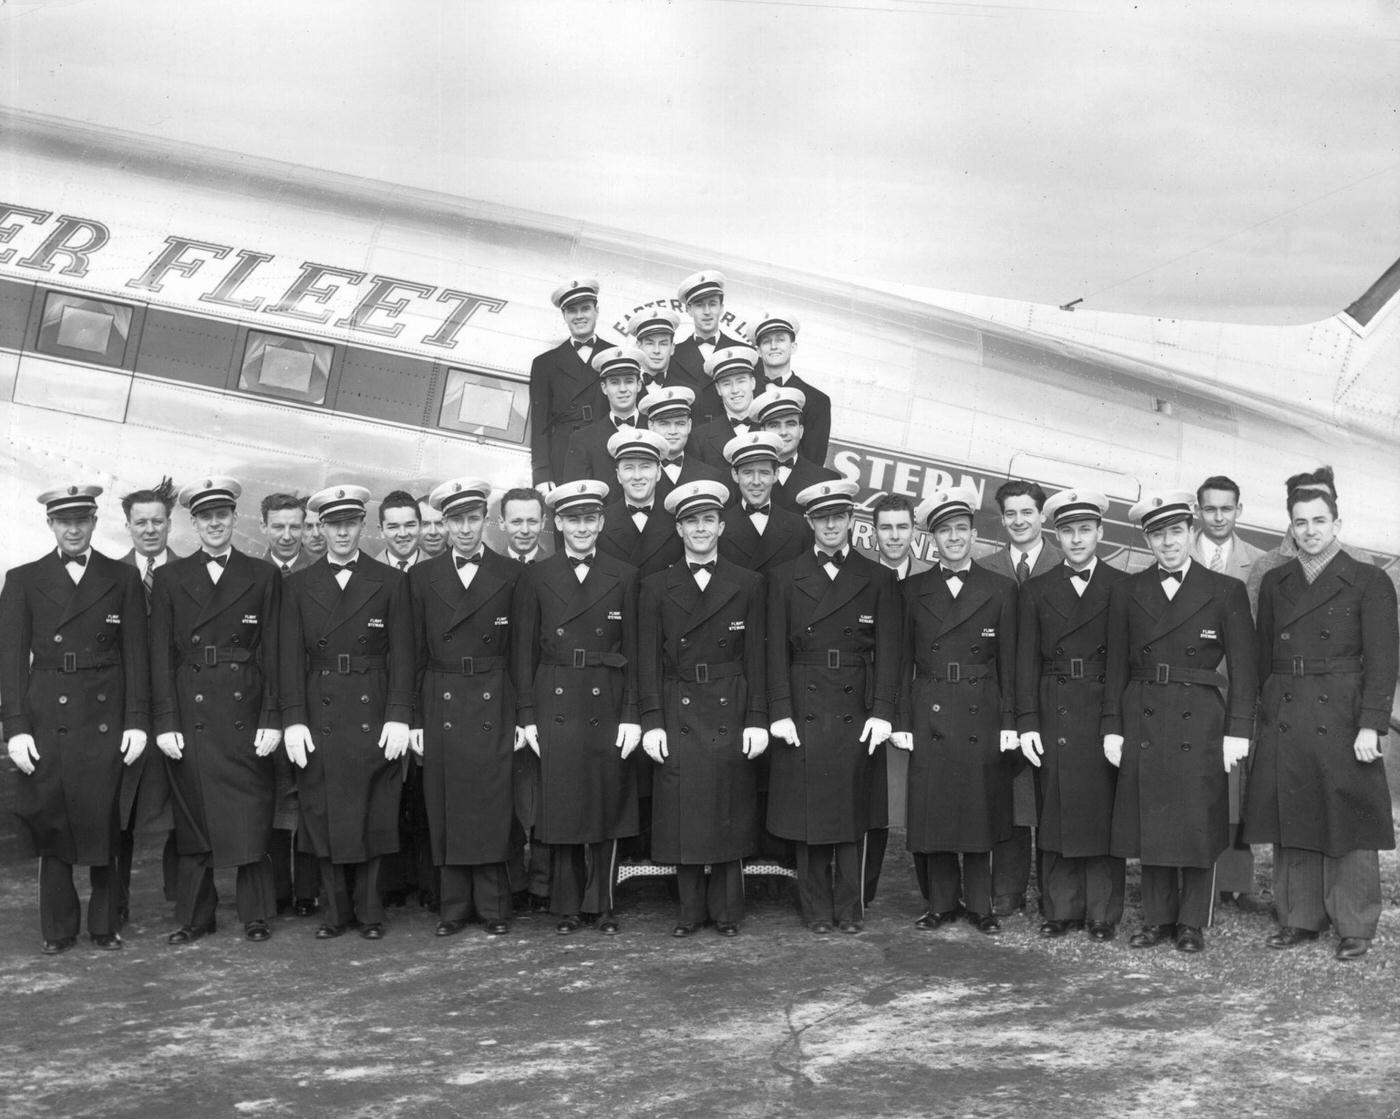 A group portrait shows uniformed flight stewards posing in front of the Eastern Airlines 'Silversleeper' airplane, a passenger and mail delivery plane.